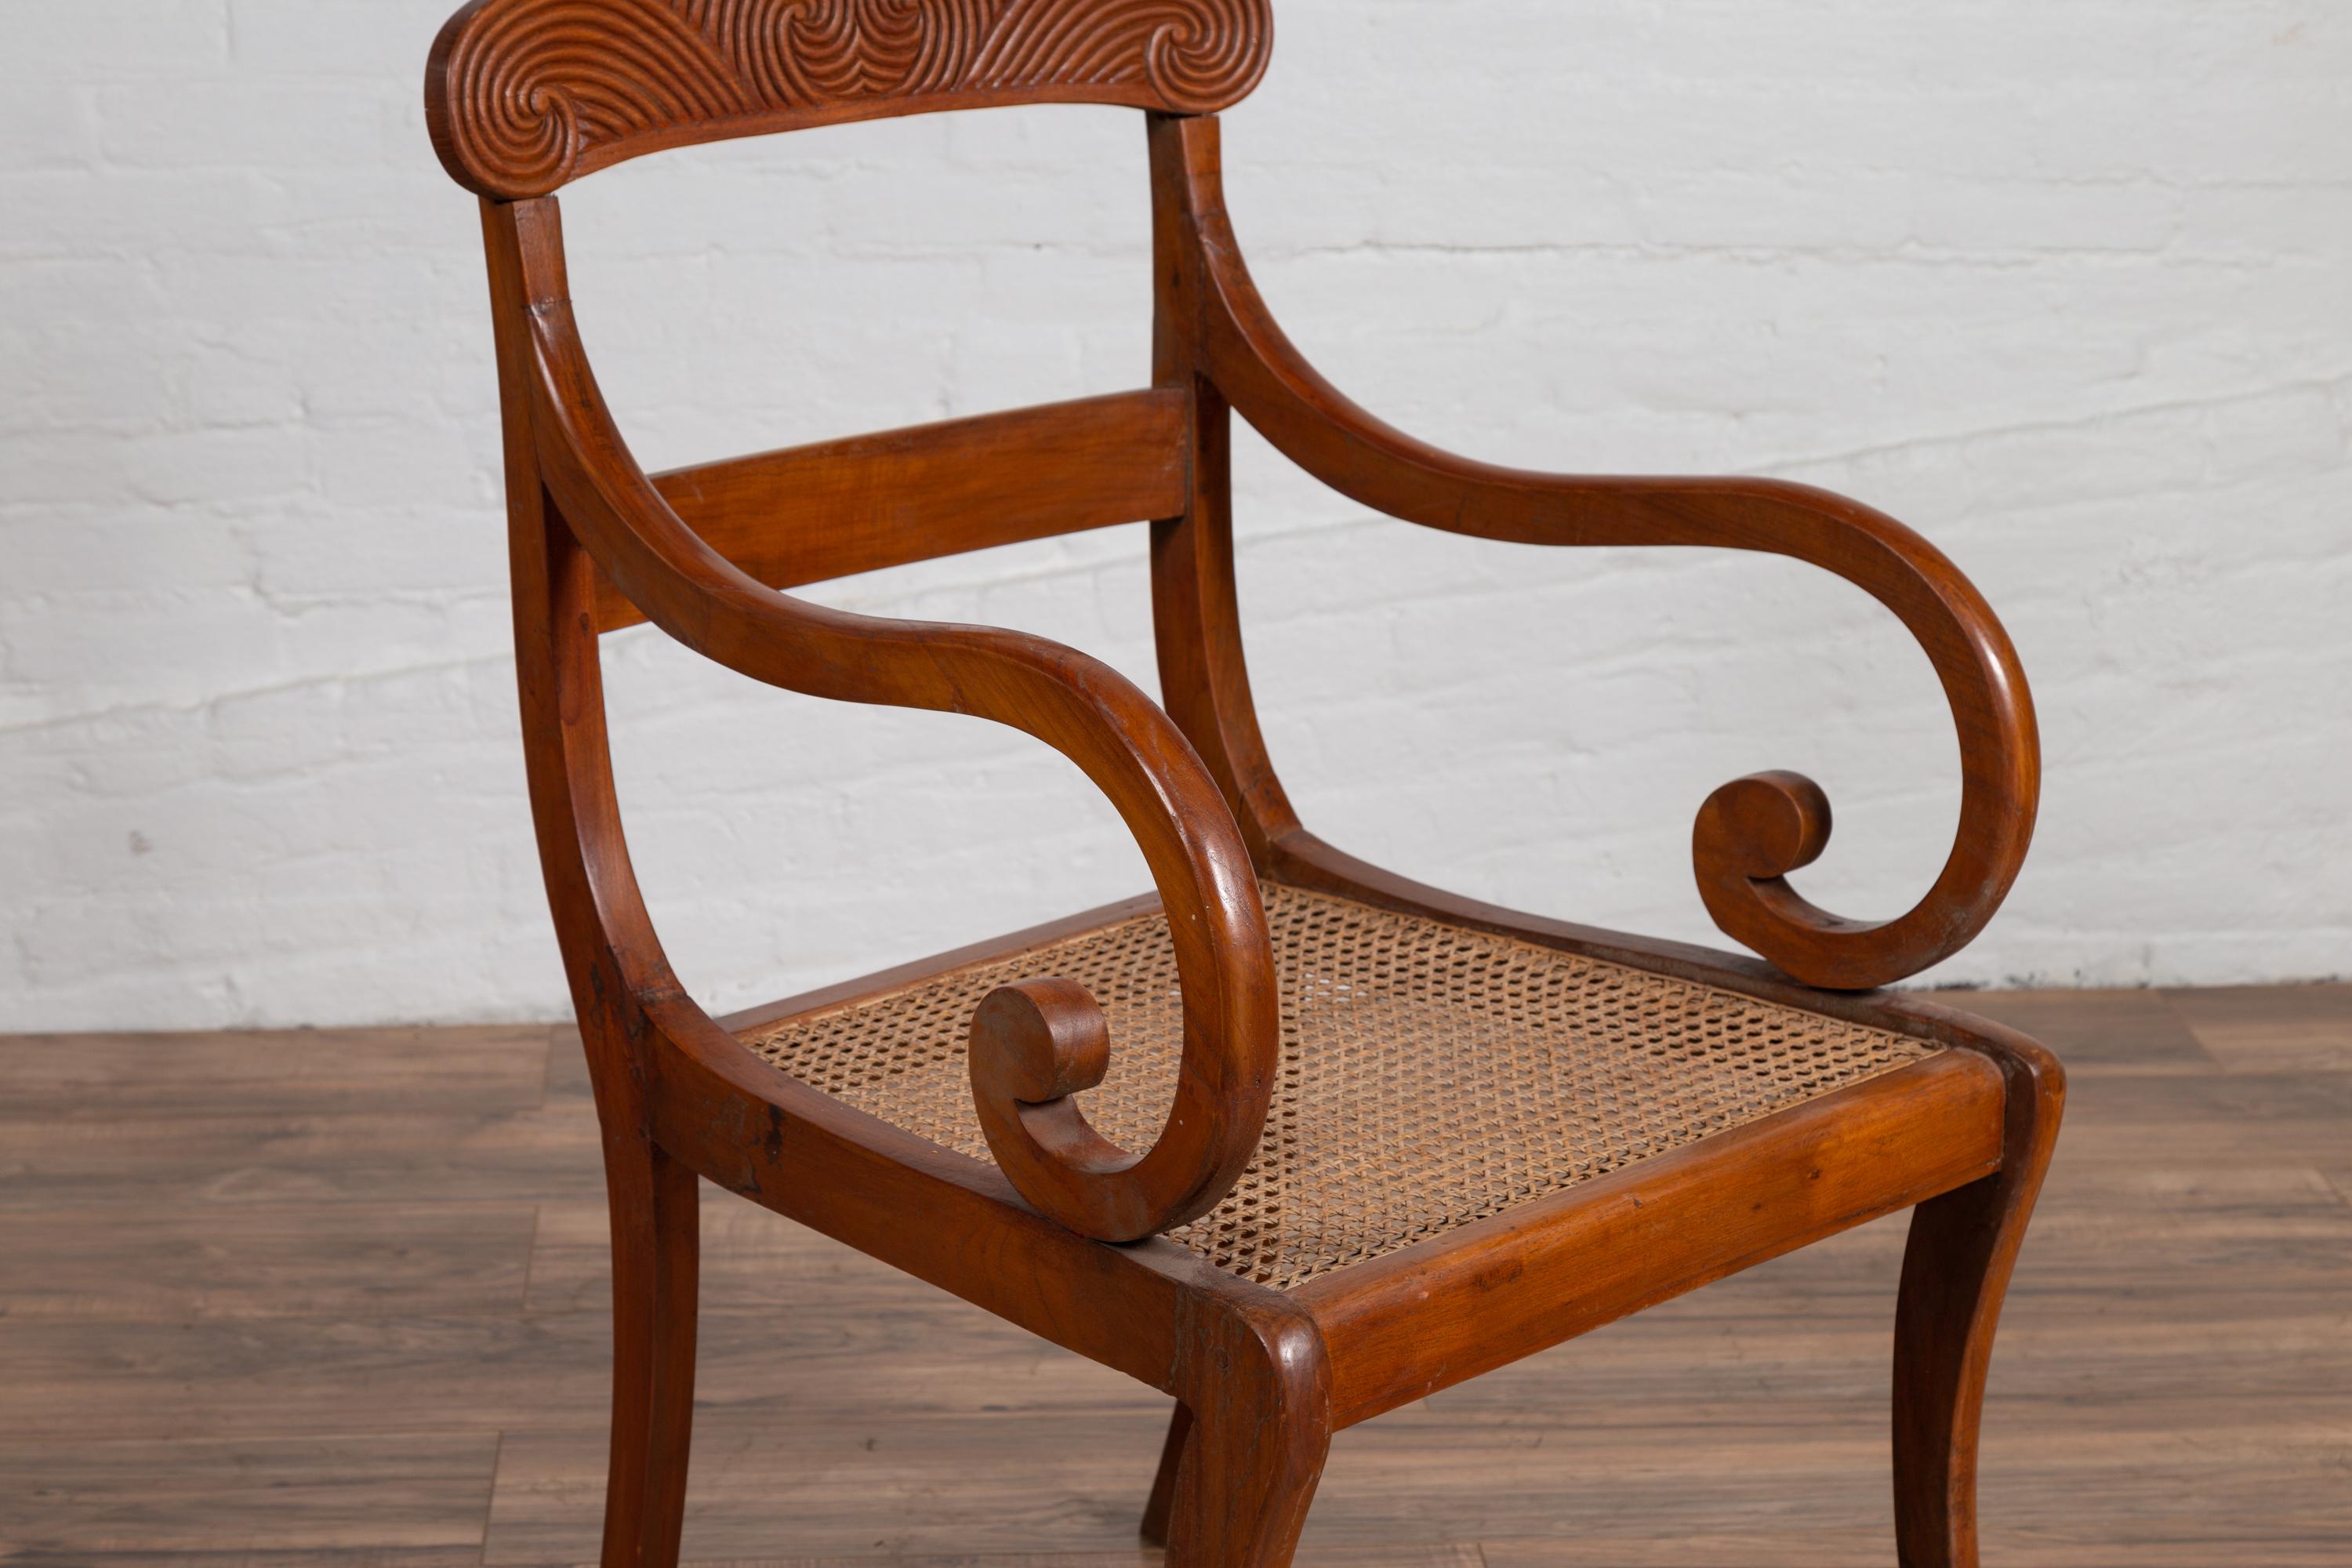 Antique Javanese Wooden Armchair with Carved Back, Curving Arms and Rattan Seat For Sale 2